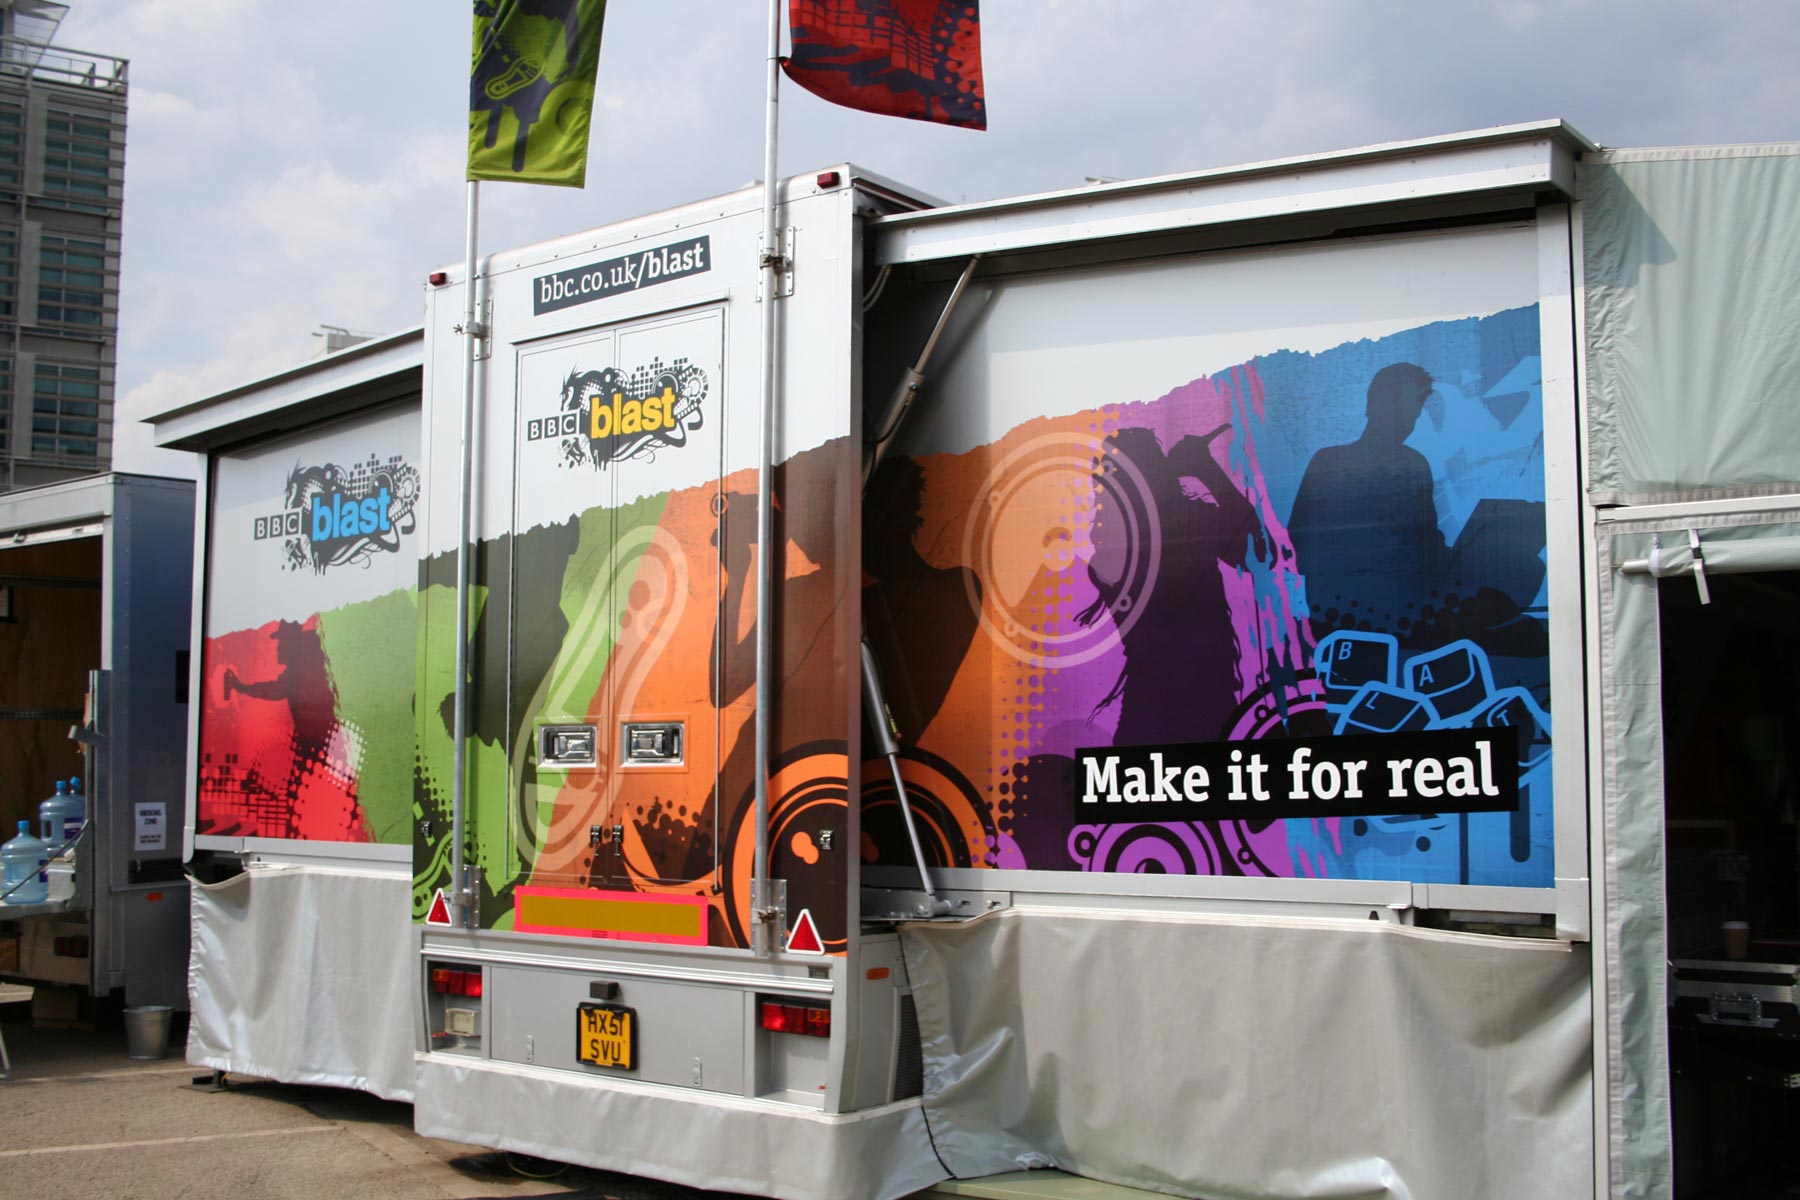 A powerful application for the brand was a set of articulated trucks which toured the UK for a period of eight months, designed to bring creativity to the far reaches of the community.